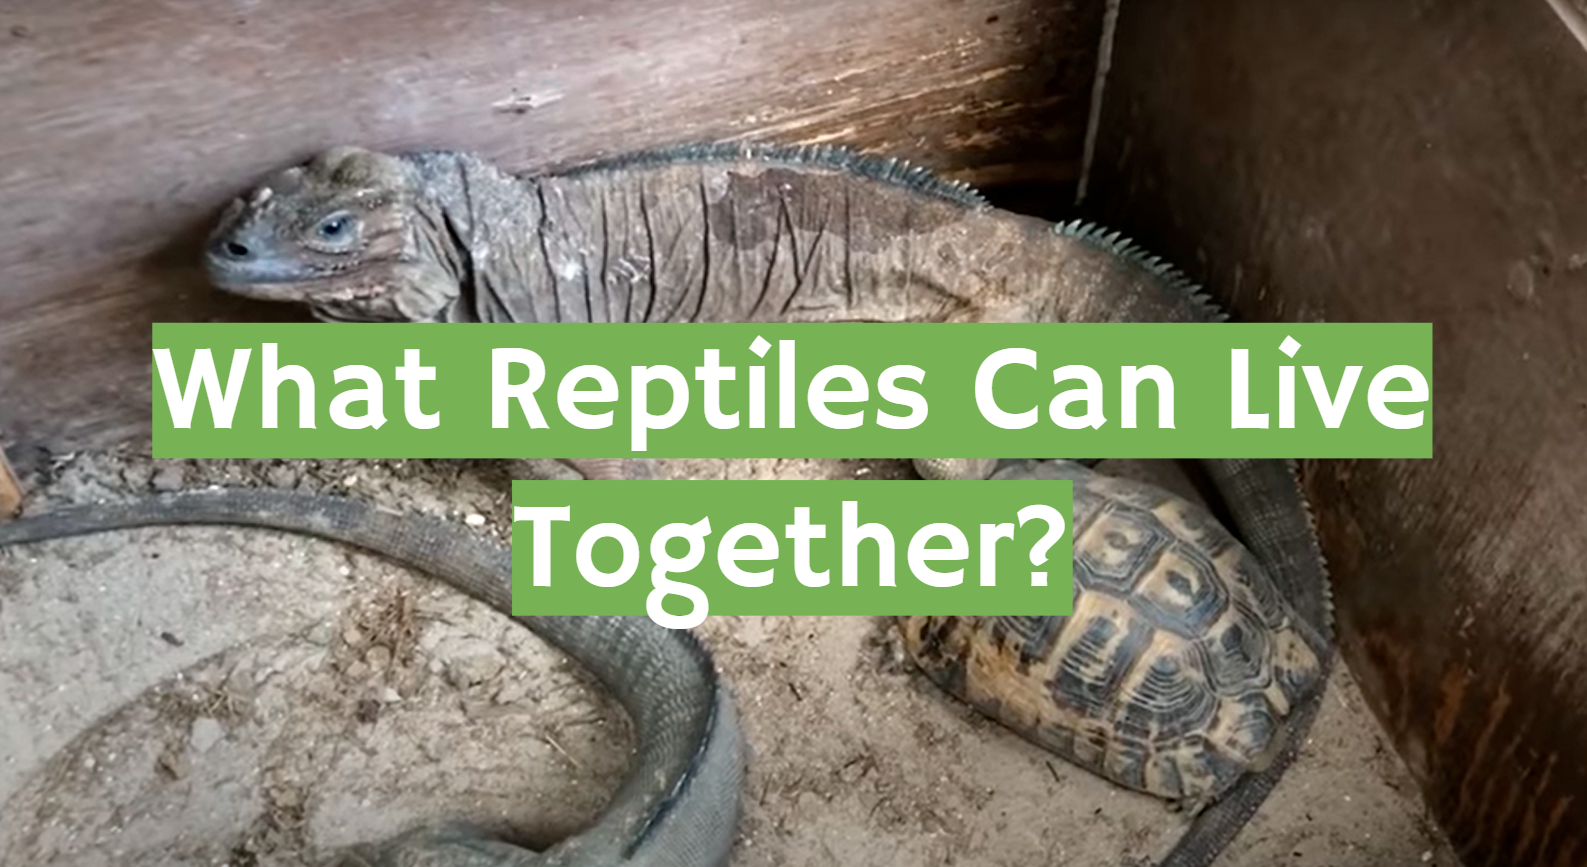 What Reptiles Can Live Together?